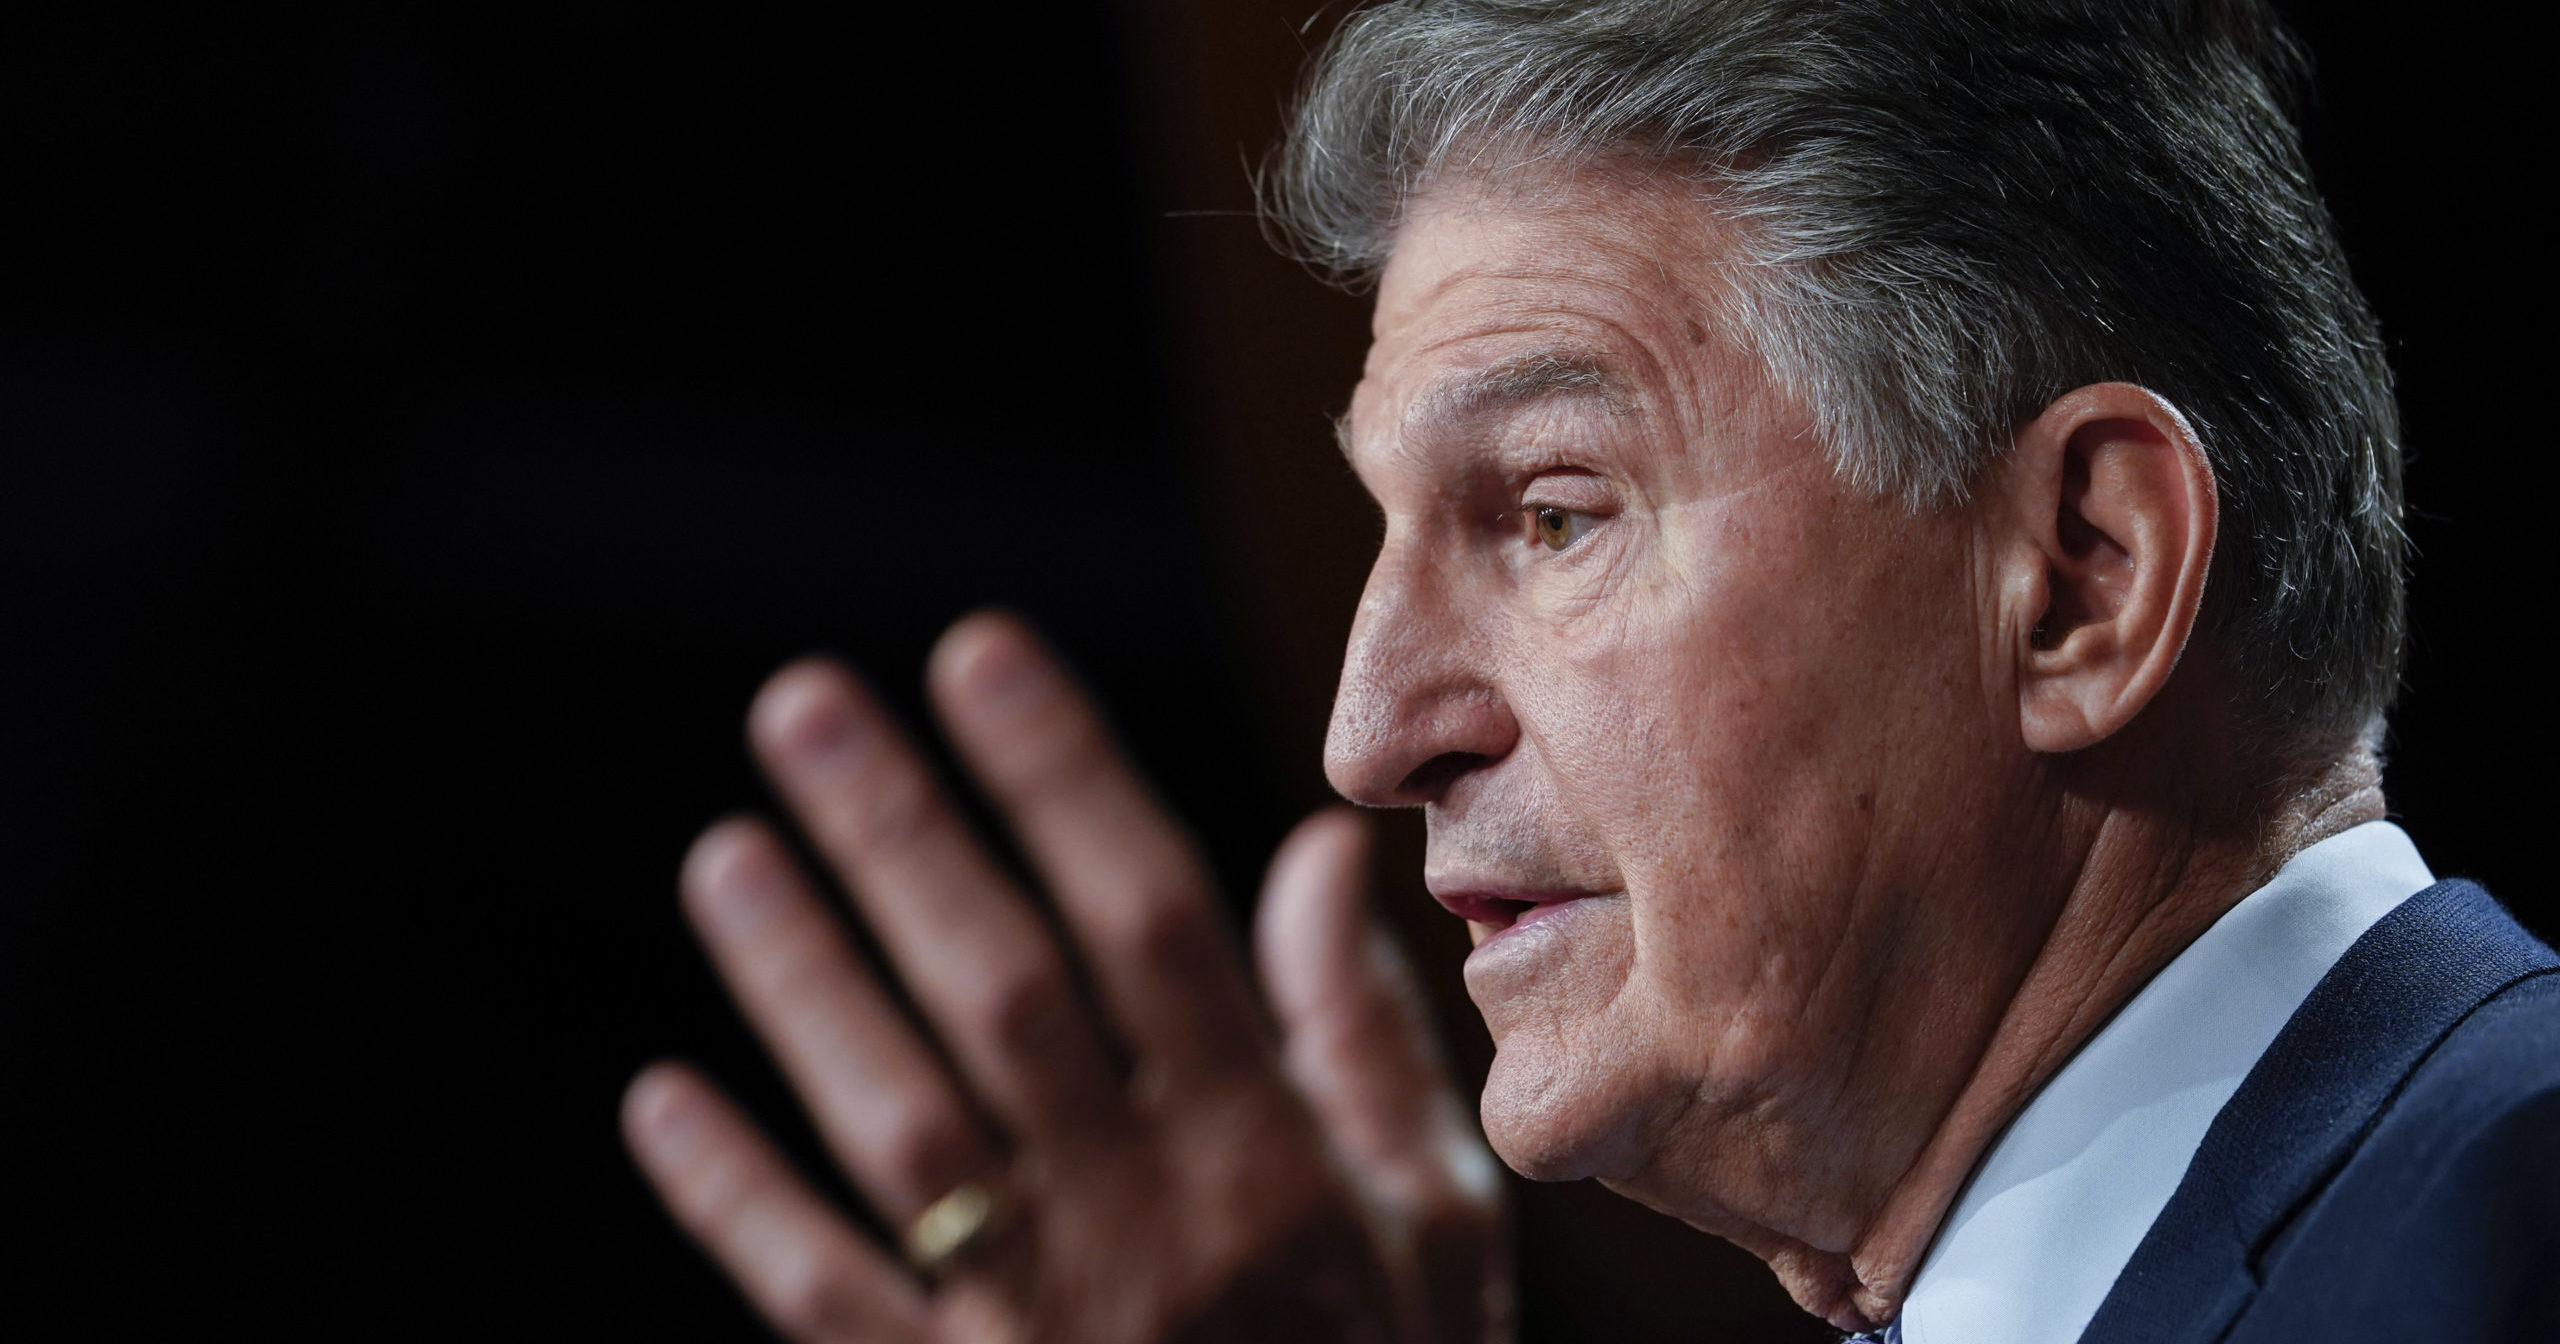 Sen. Joe Manchin speaks during a news conference Tuesday at the Capitol in Washington.